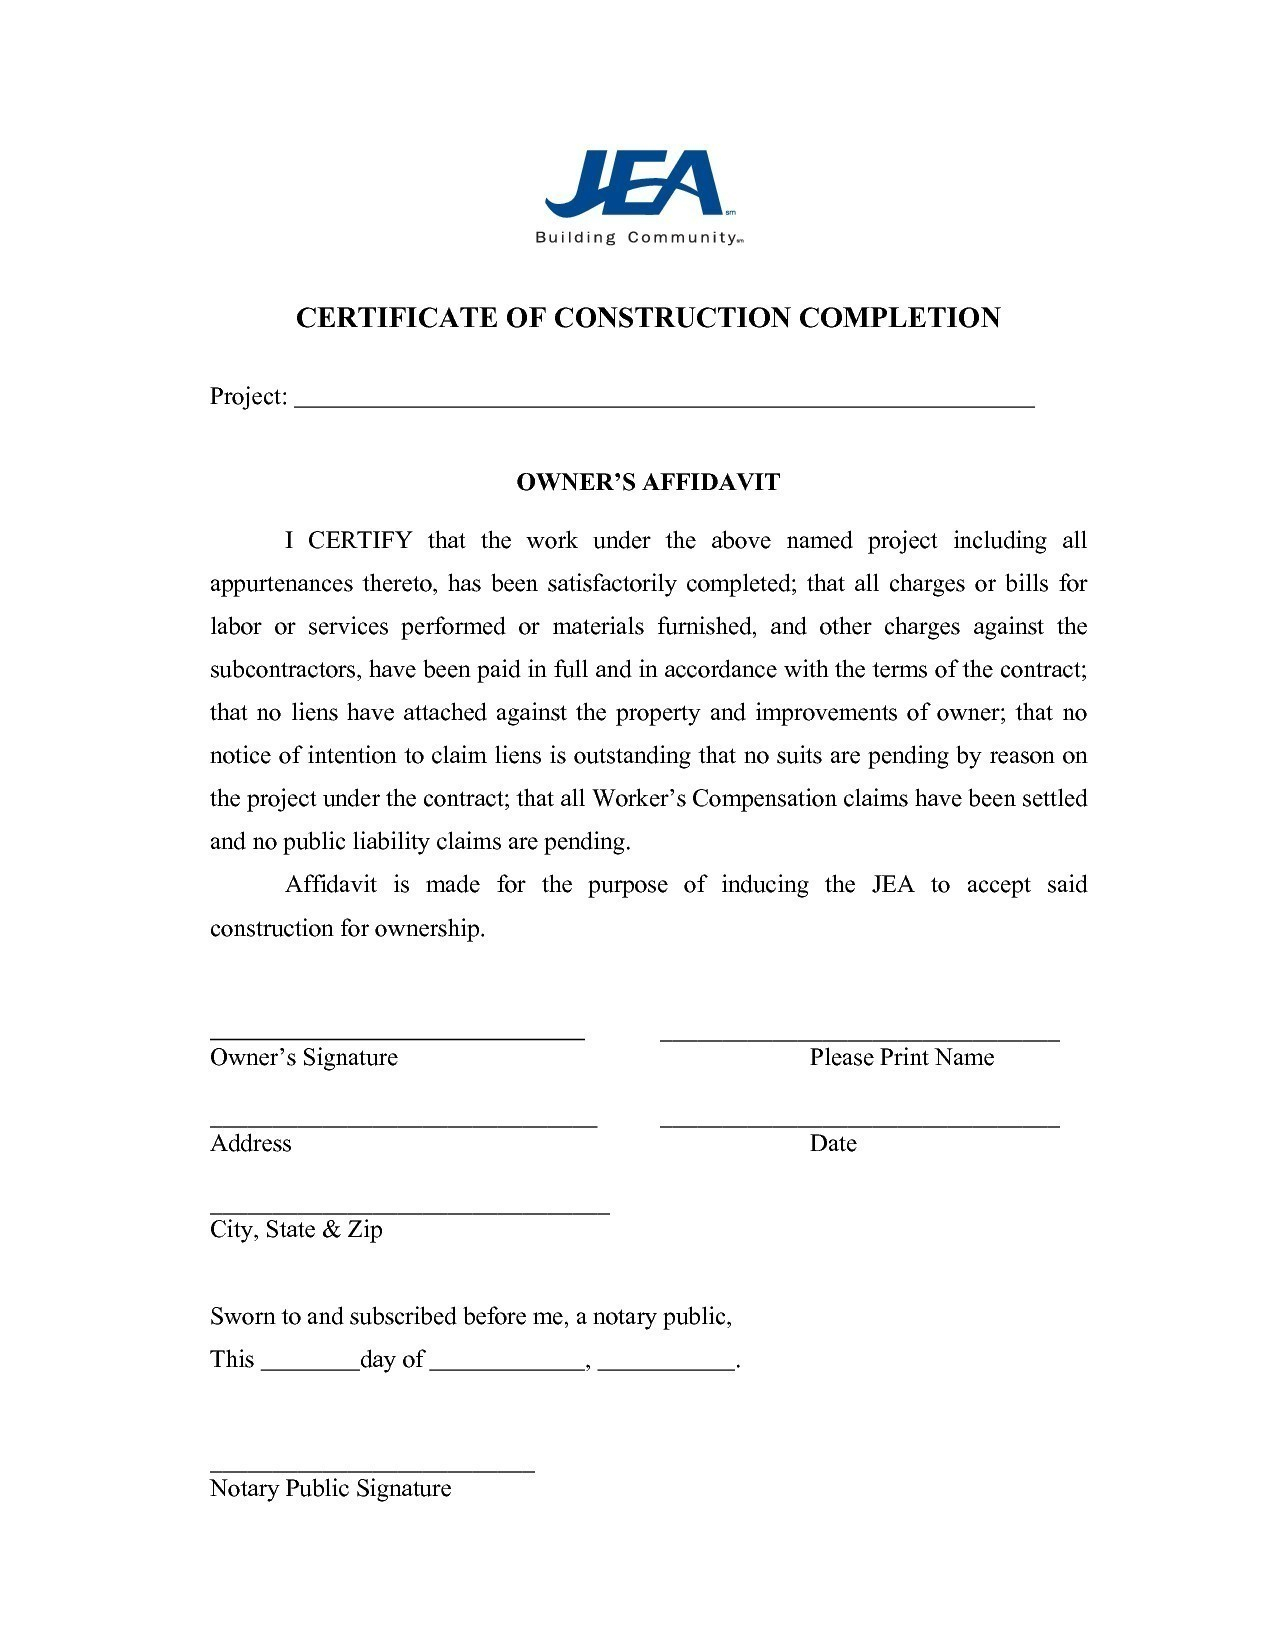 Project Completion Certificate Sample – Zimer.bwong.co Inside Certificate Of Completion Template Construction